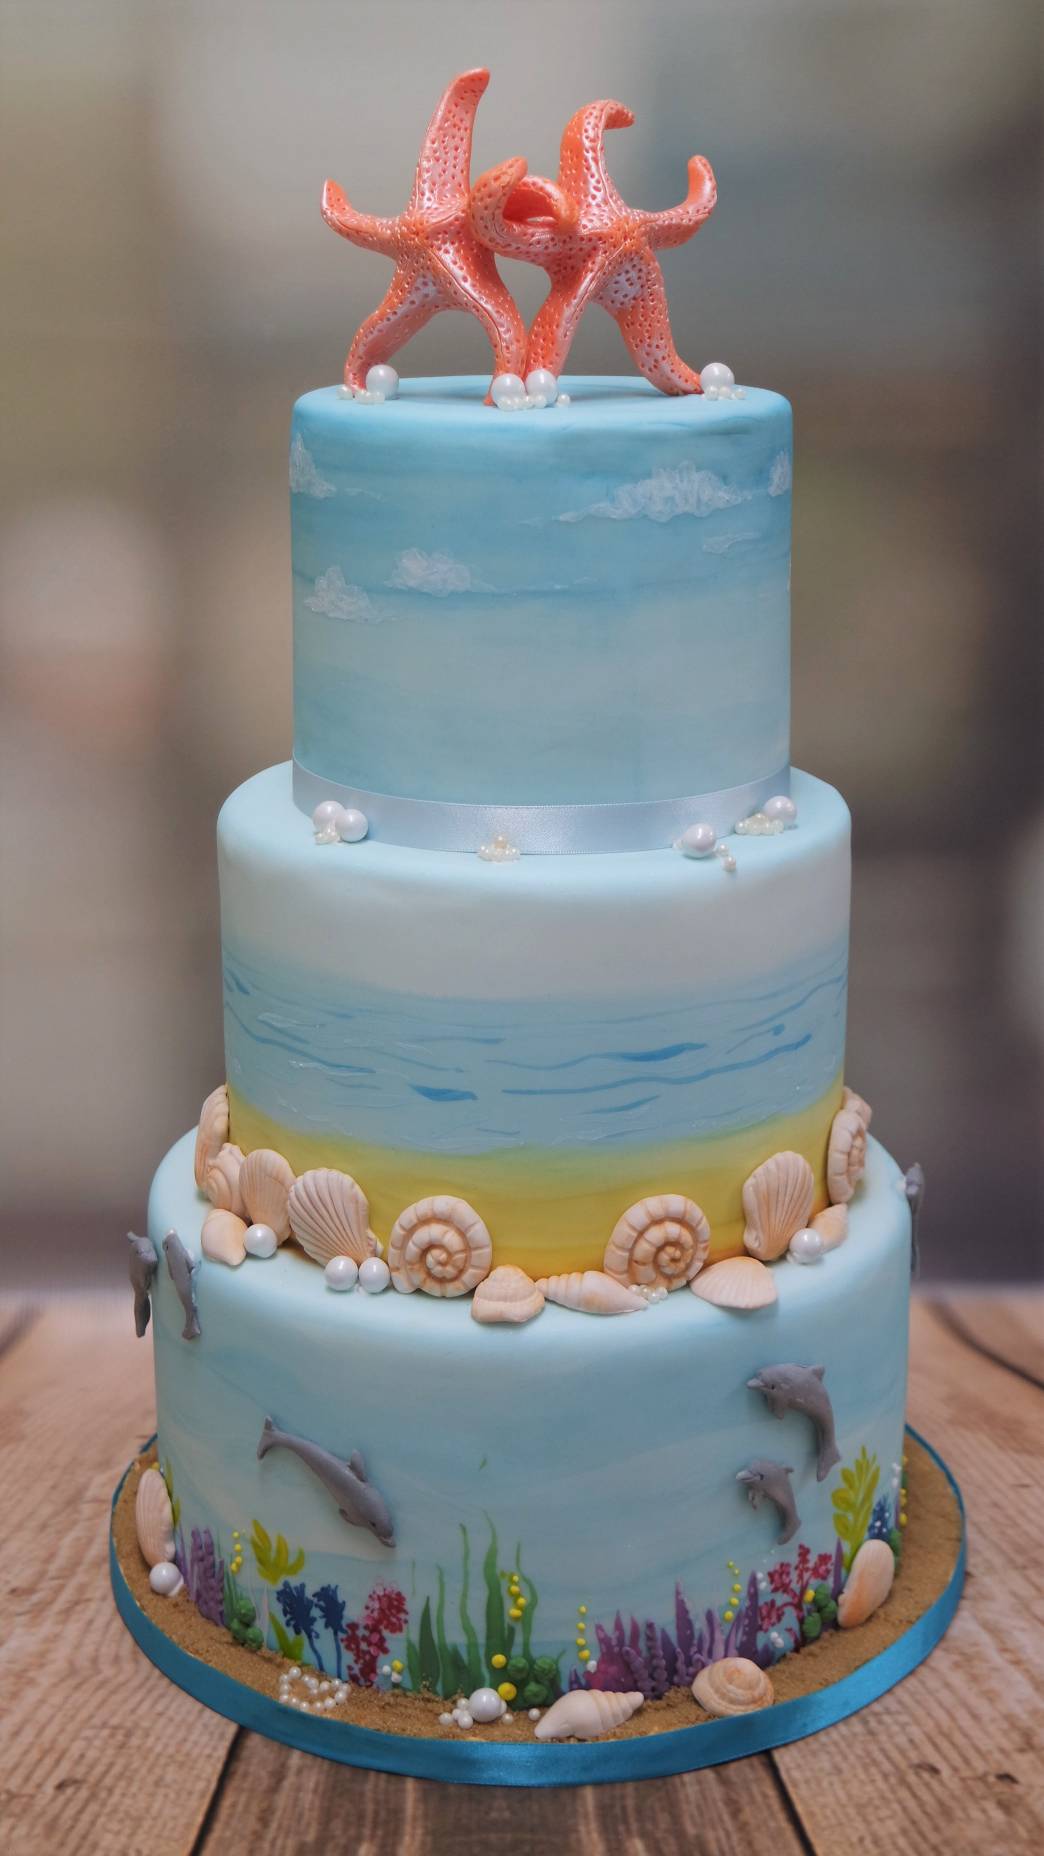 Crafty Cakes on X: The perfect cake for a beach themed wedding by the sea.  We love the intertwined starfish toppers, too! 🌊🐚 #bespokecakeexeter  #weddingcake #weddingcakeexeter #beachthemed #bythesea #starfish #shells  #rollingwaves #exeterweddings #